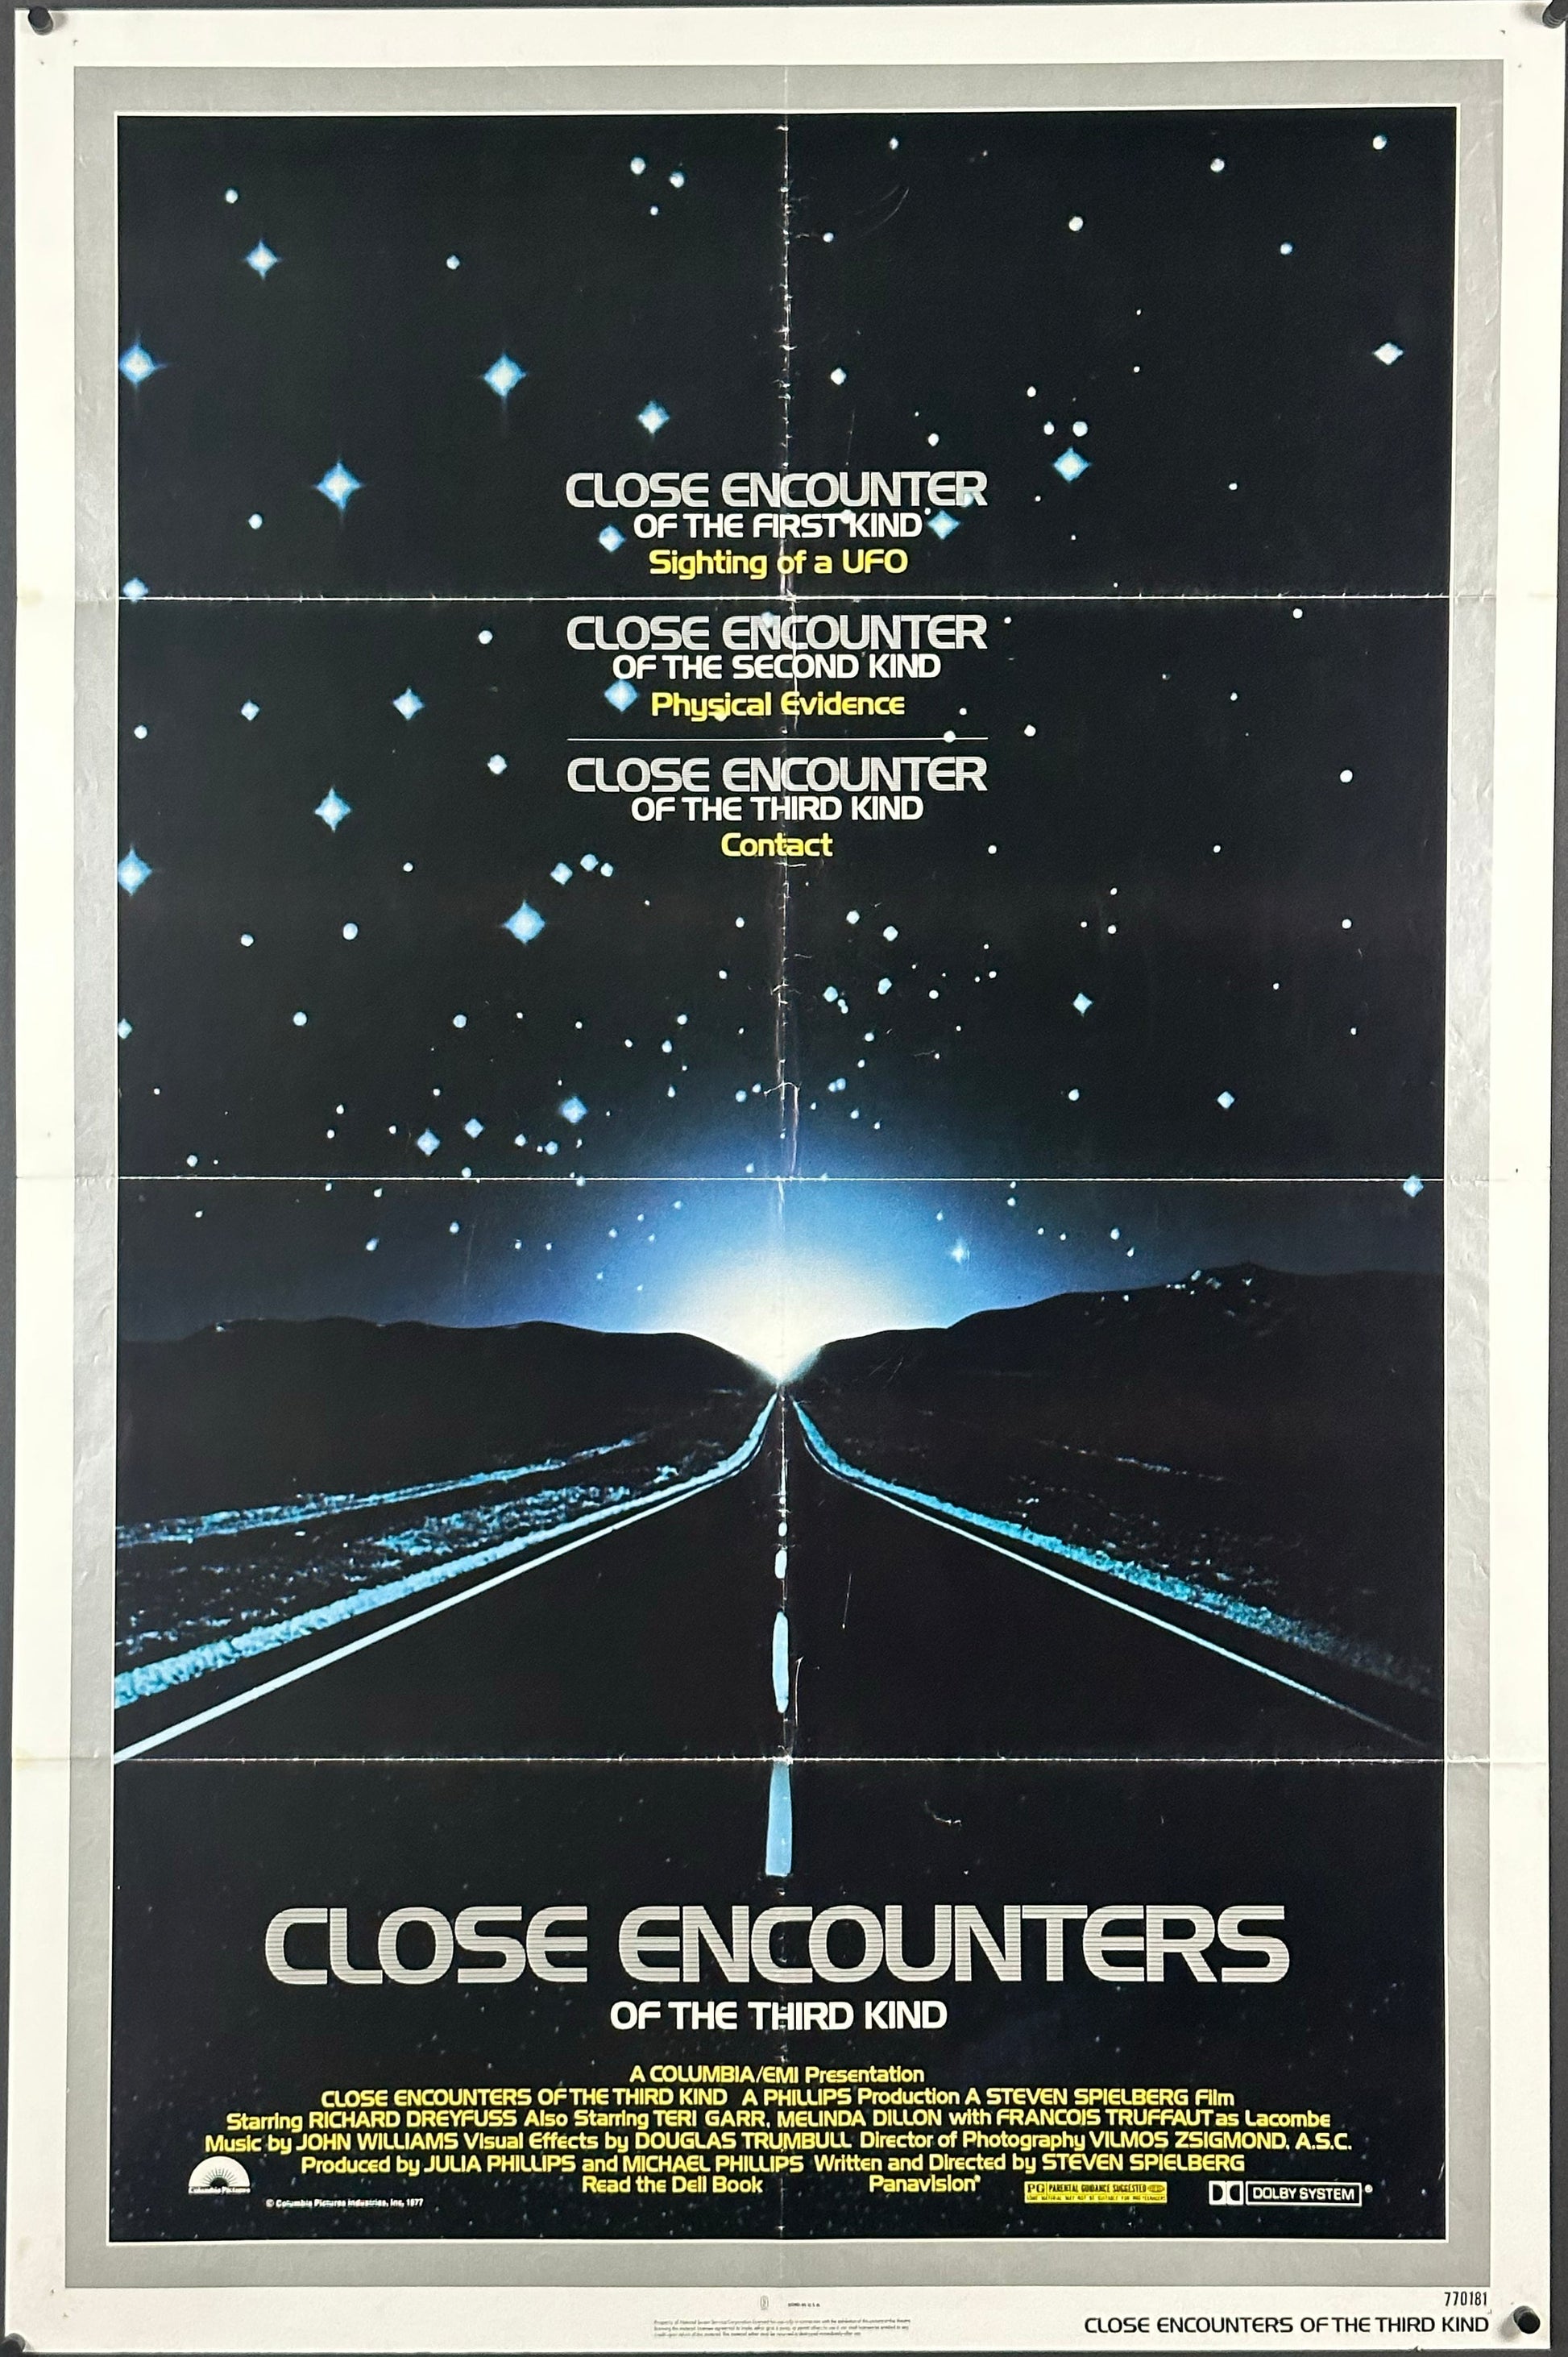 Close Encounters Of The Third Kind - posterpalace.com